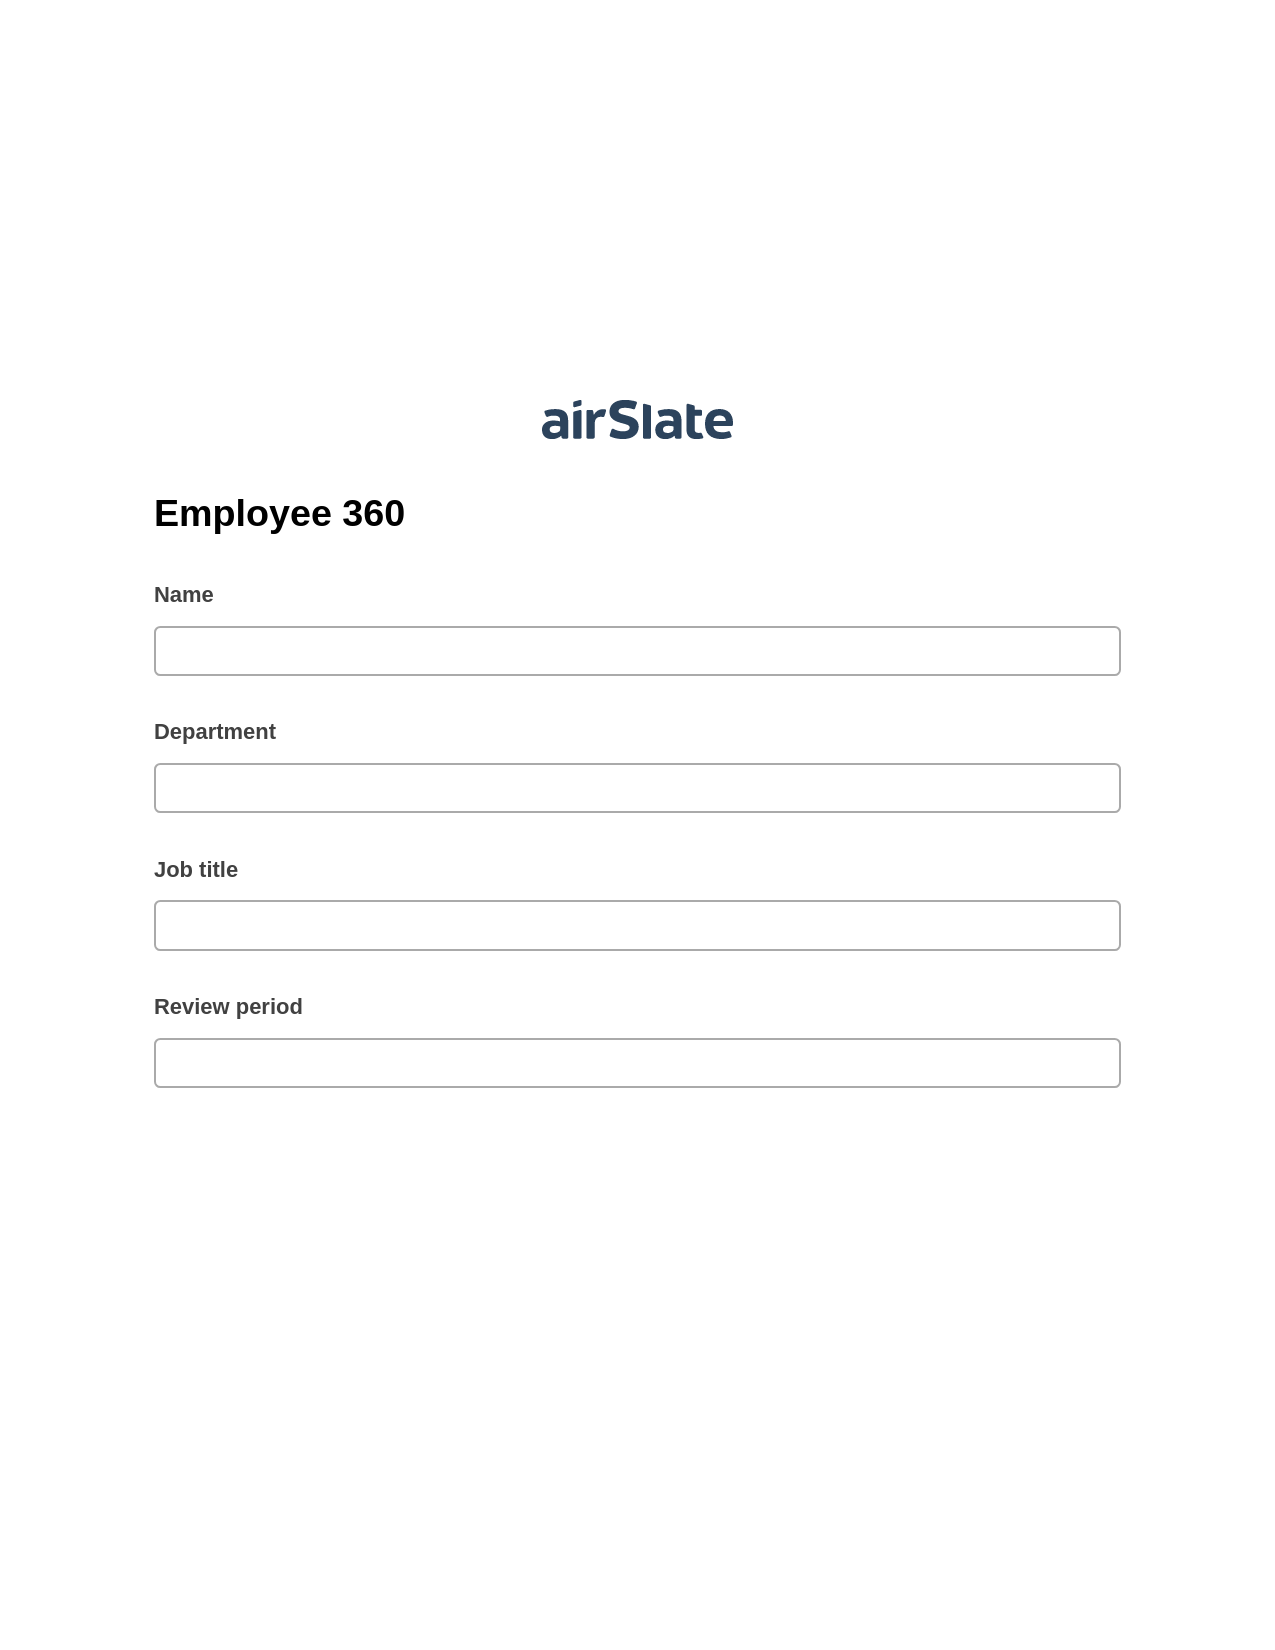 Employee 360 Pre-fill from CSV File Bot, Update MS Dynamics 365 Record Bot, Export to WebMerge Bot